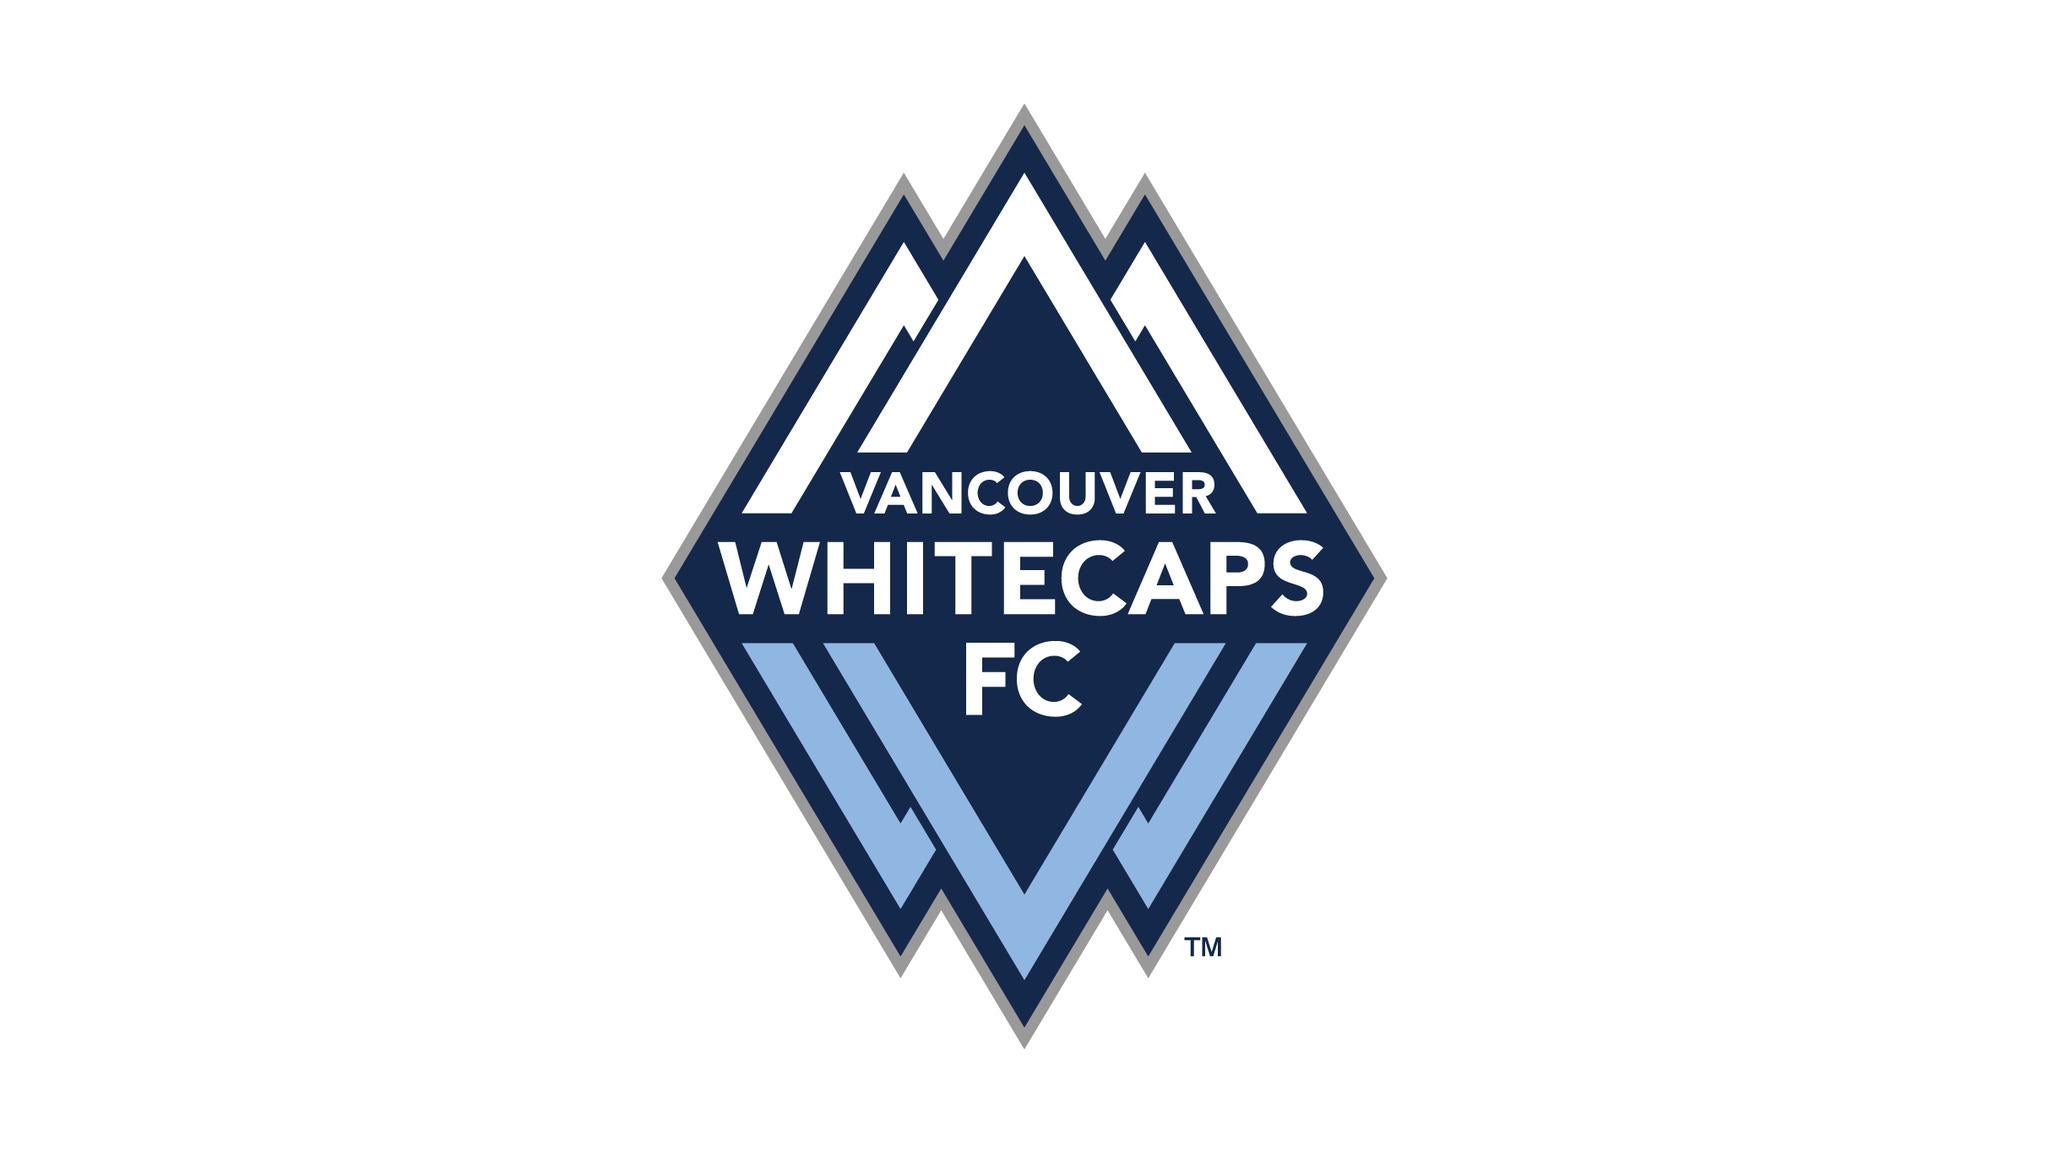 Image used with permission from Ticketmaster | Vancouver Whitecaps FC vs. Seattle Sounders FC tickets